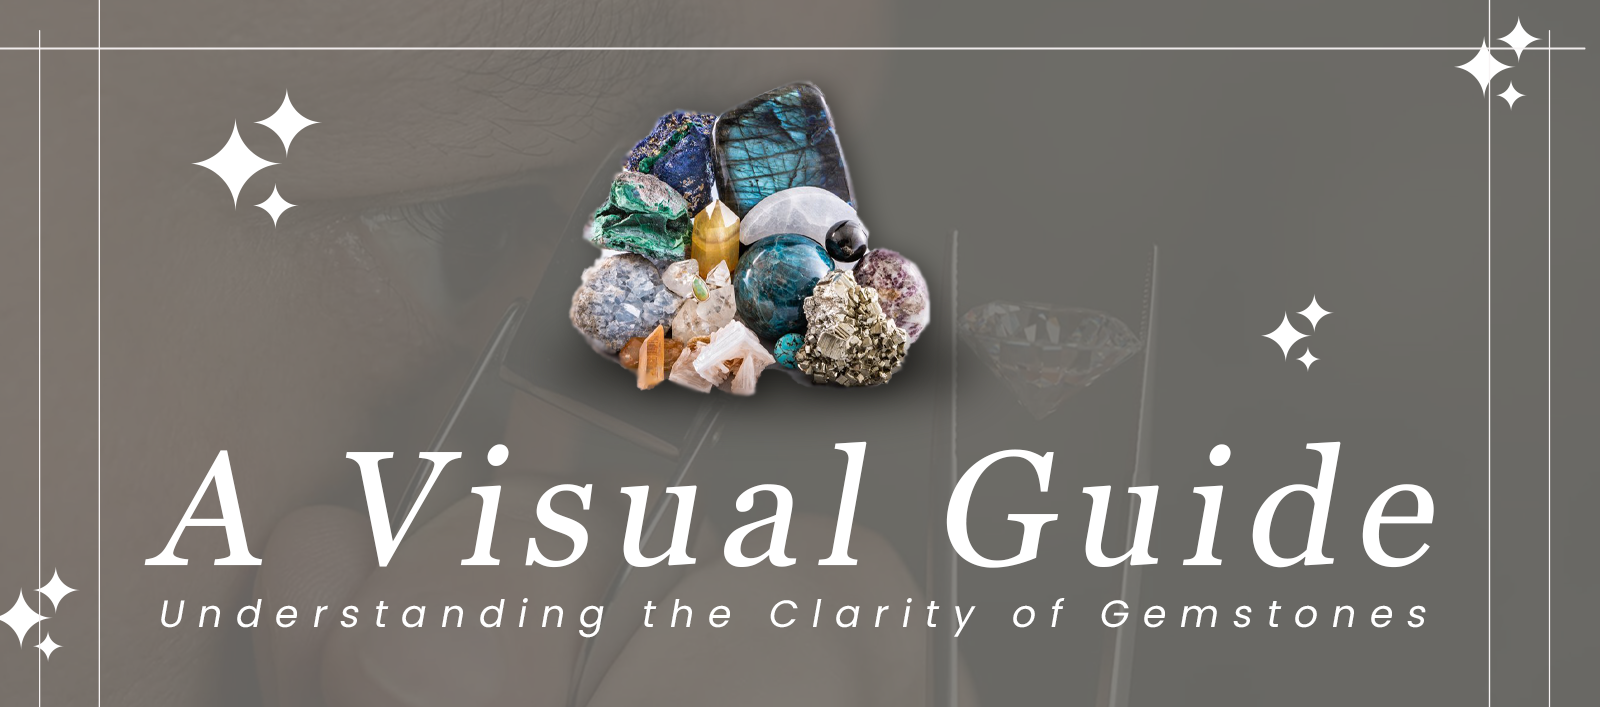 A Visual Guide: Understanding the Clarity of Gemstones